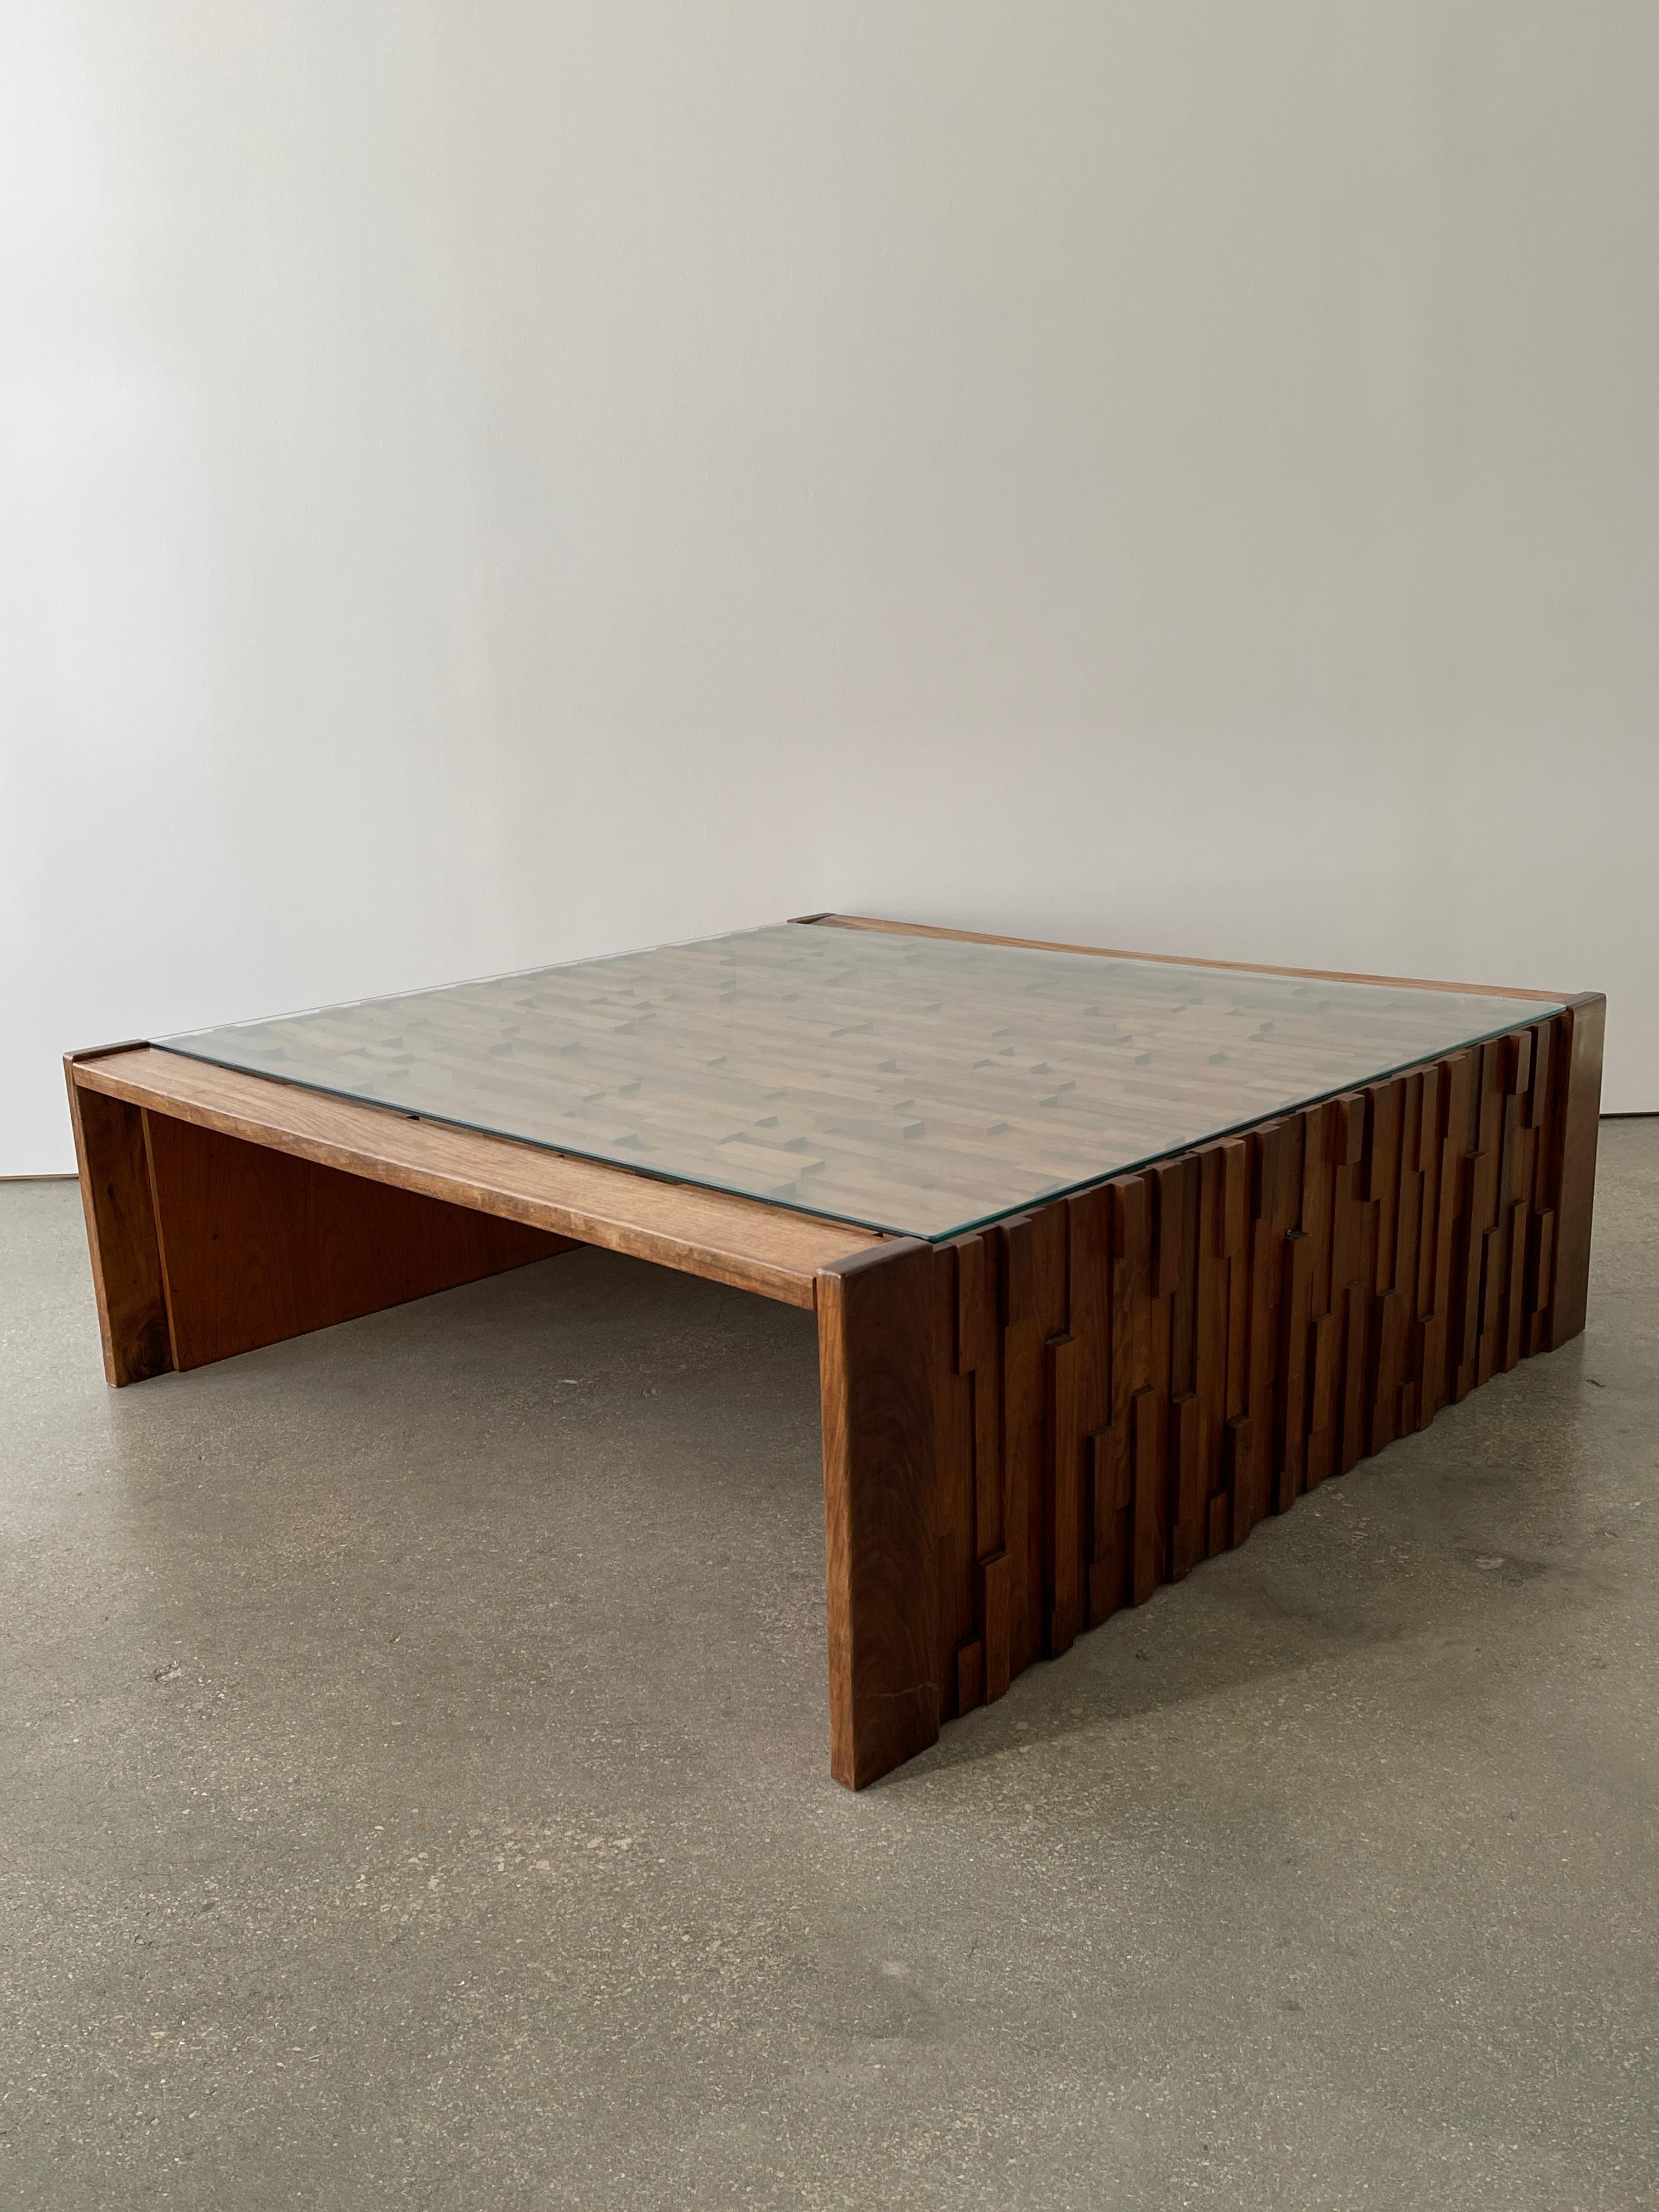 Mid 20th Century Rosewood Percival Lafer coffee table made in Brazil, 1960s. The table was made of several wooden parts including rosewood, teak, jacaranda and a glass top. Beautifully handcrafted piece by piece to create an exceptional piece of